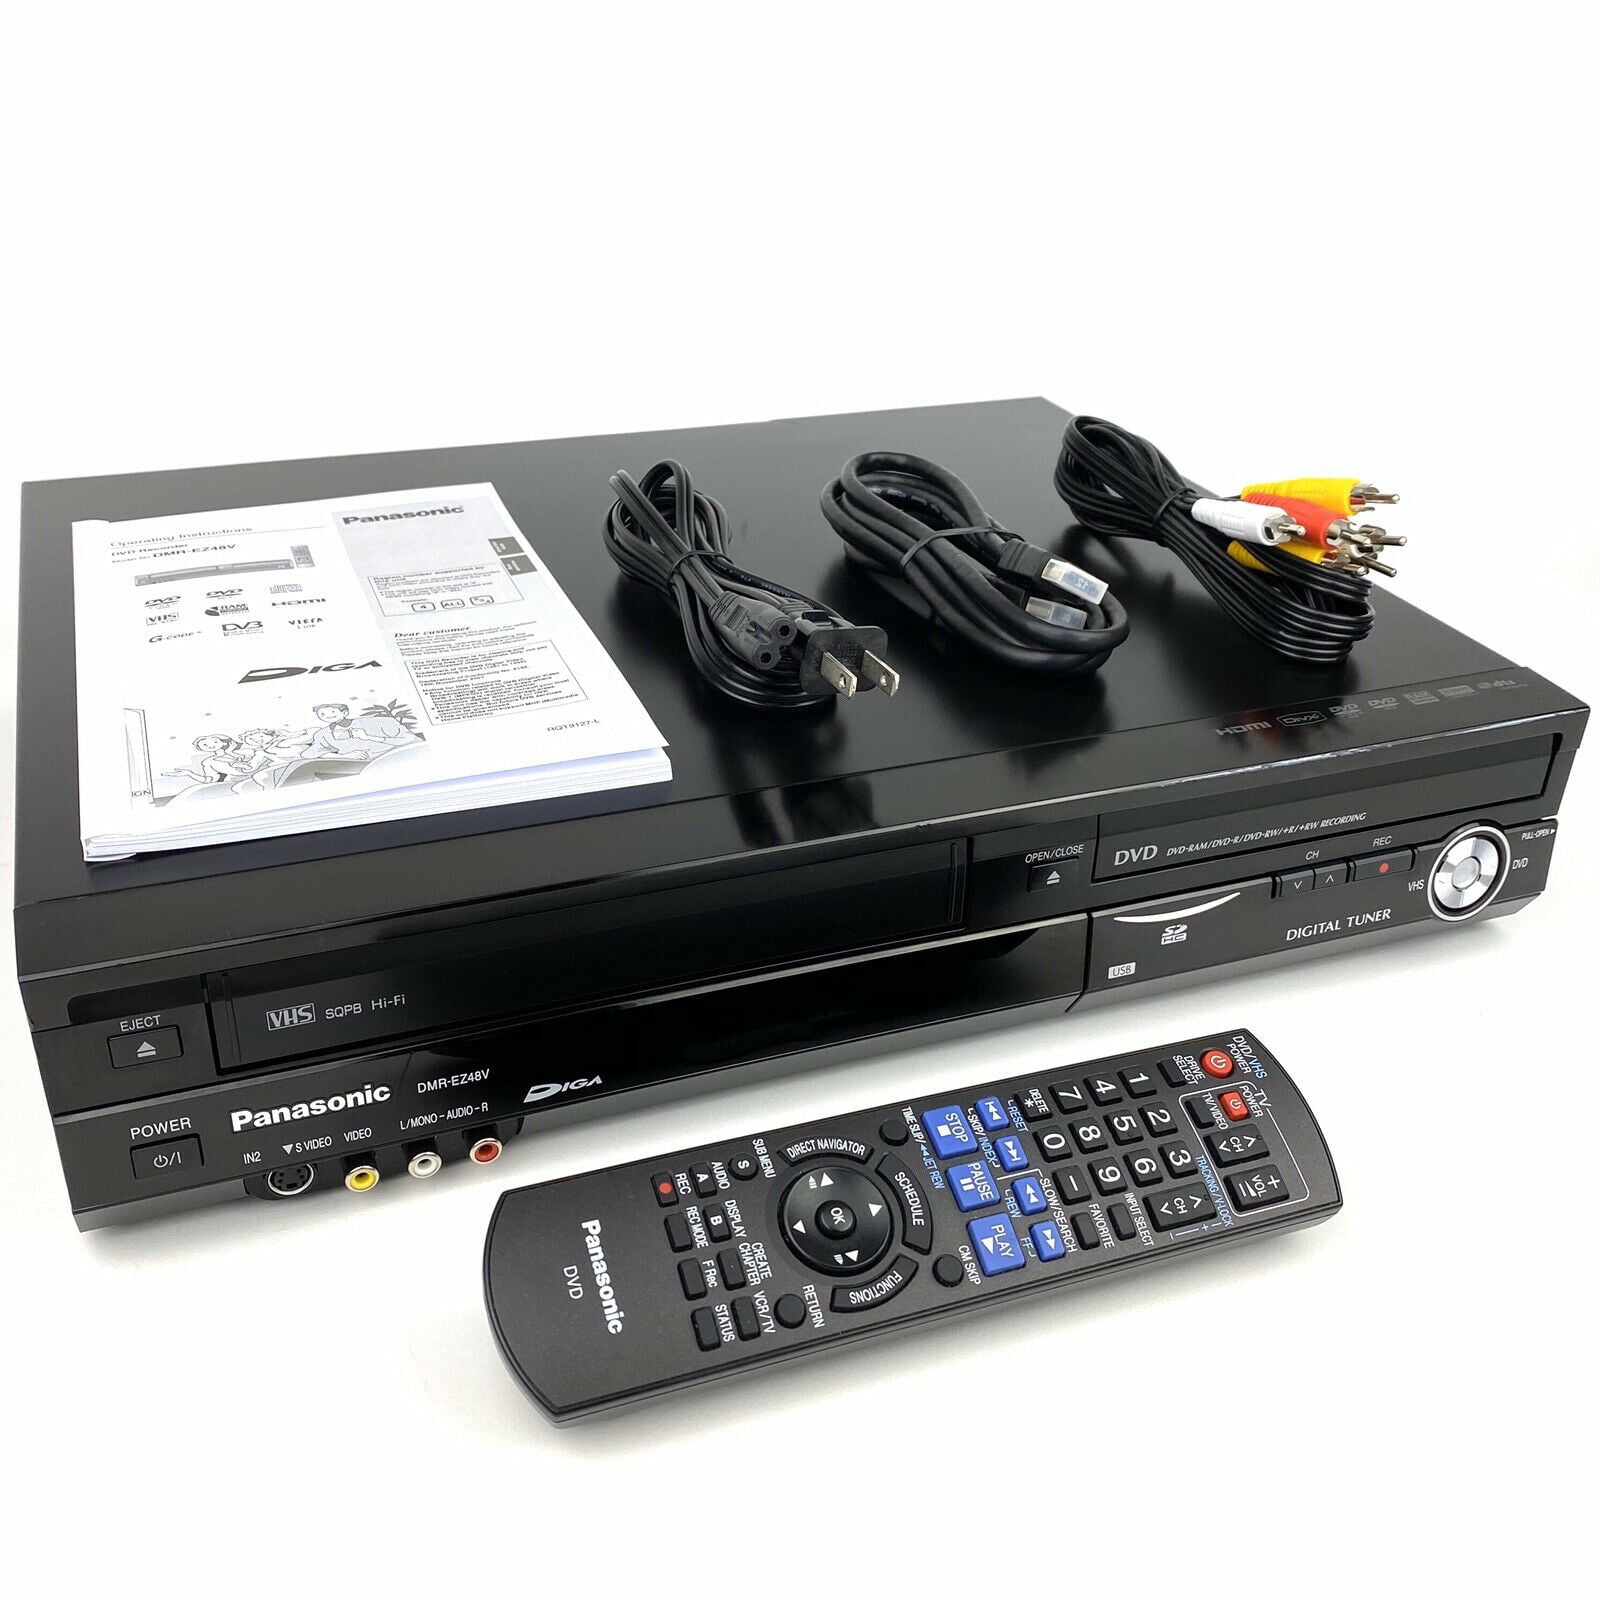 vhs player with hdmi output